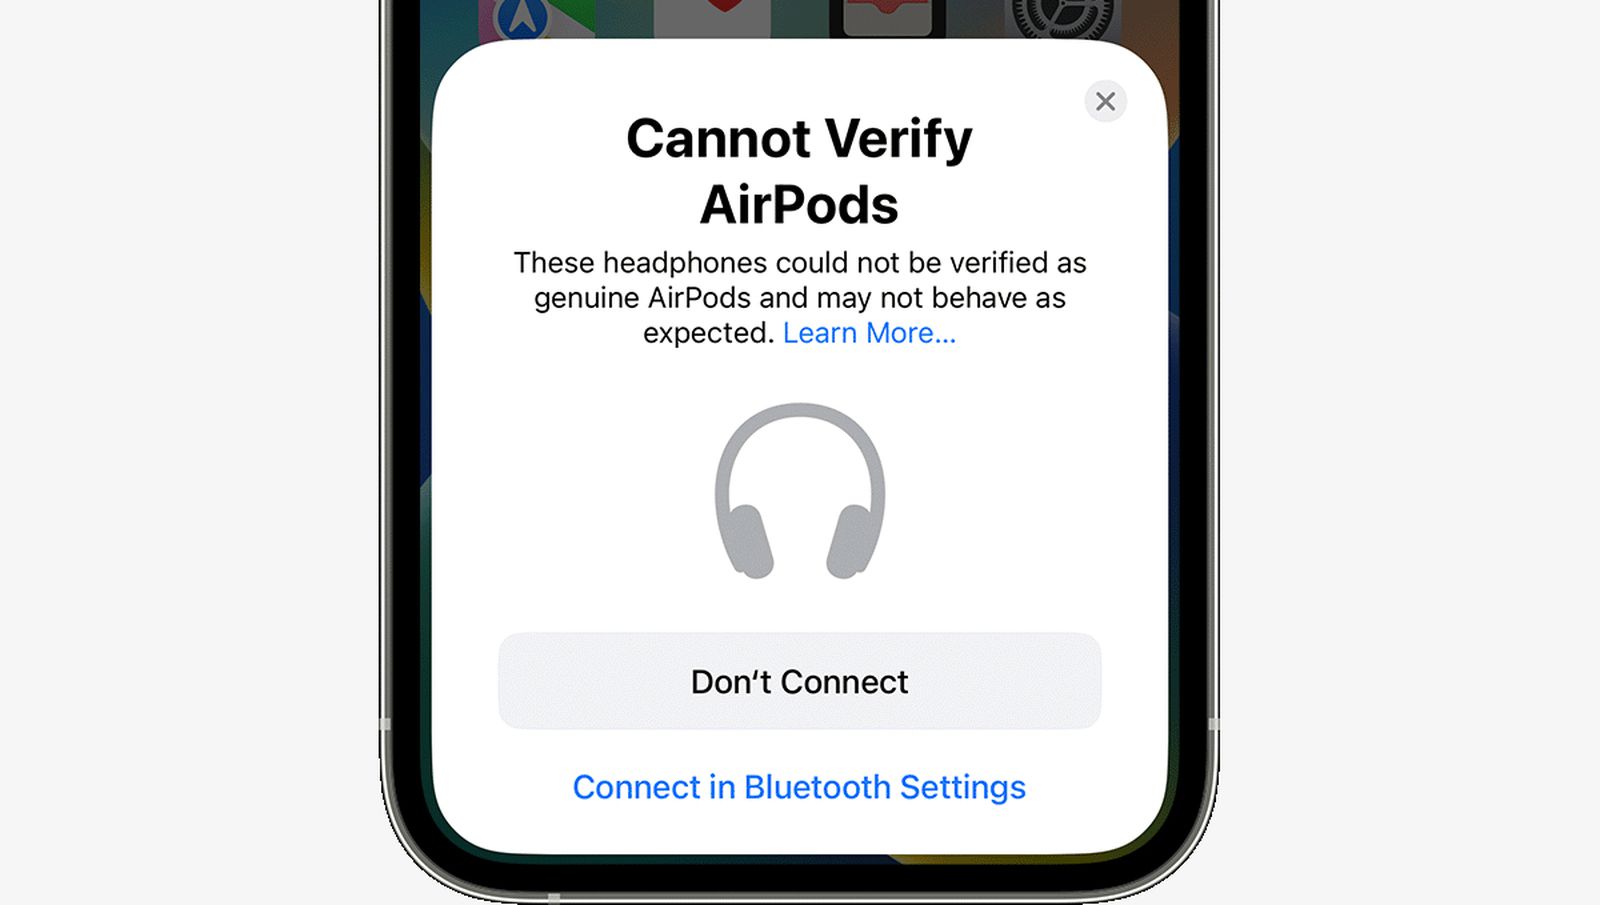 Apple Explains iPhone's New Alert When Fake Are Connected MacRumors